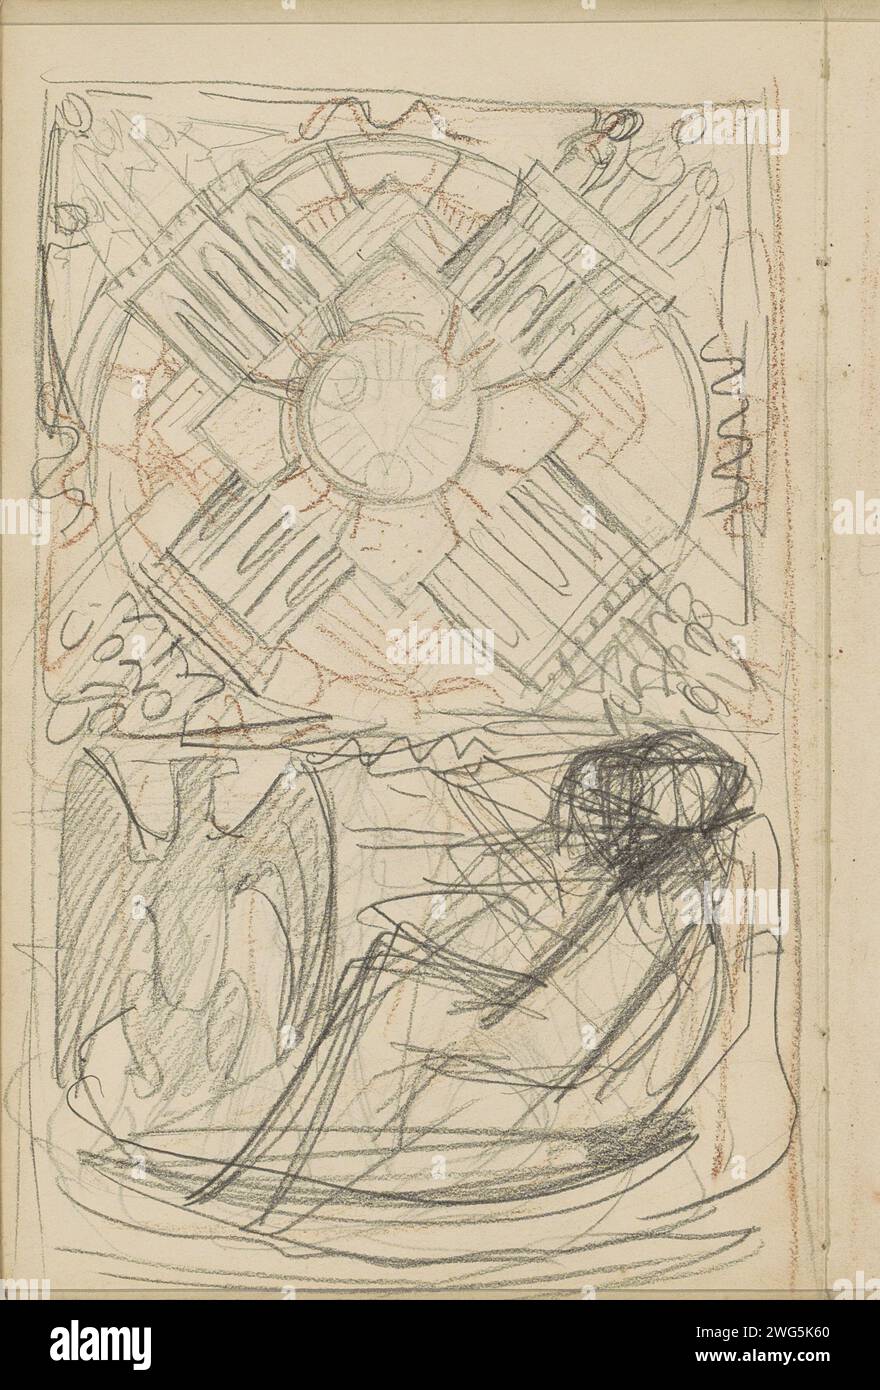 Sitting figure in an eagle against an ornamental background, c. 1889 - c. 1891  Possibly a preliminary study for a wall painting in the town hall in Den Bosch. Page 30 Verso from a sketchbook with 33 sheets.  paper. pencil. chalk  sitting figure. predatory birds: eagle Stock Photo